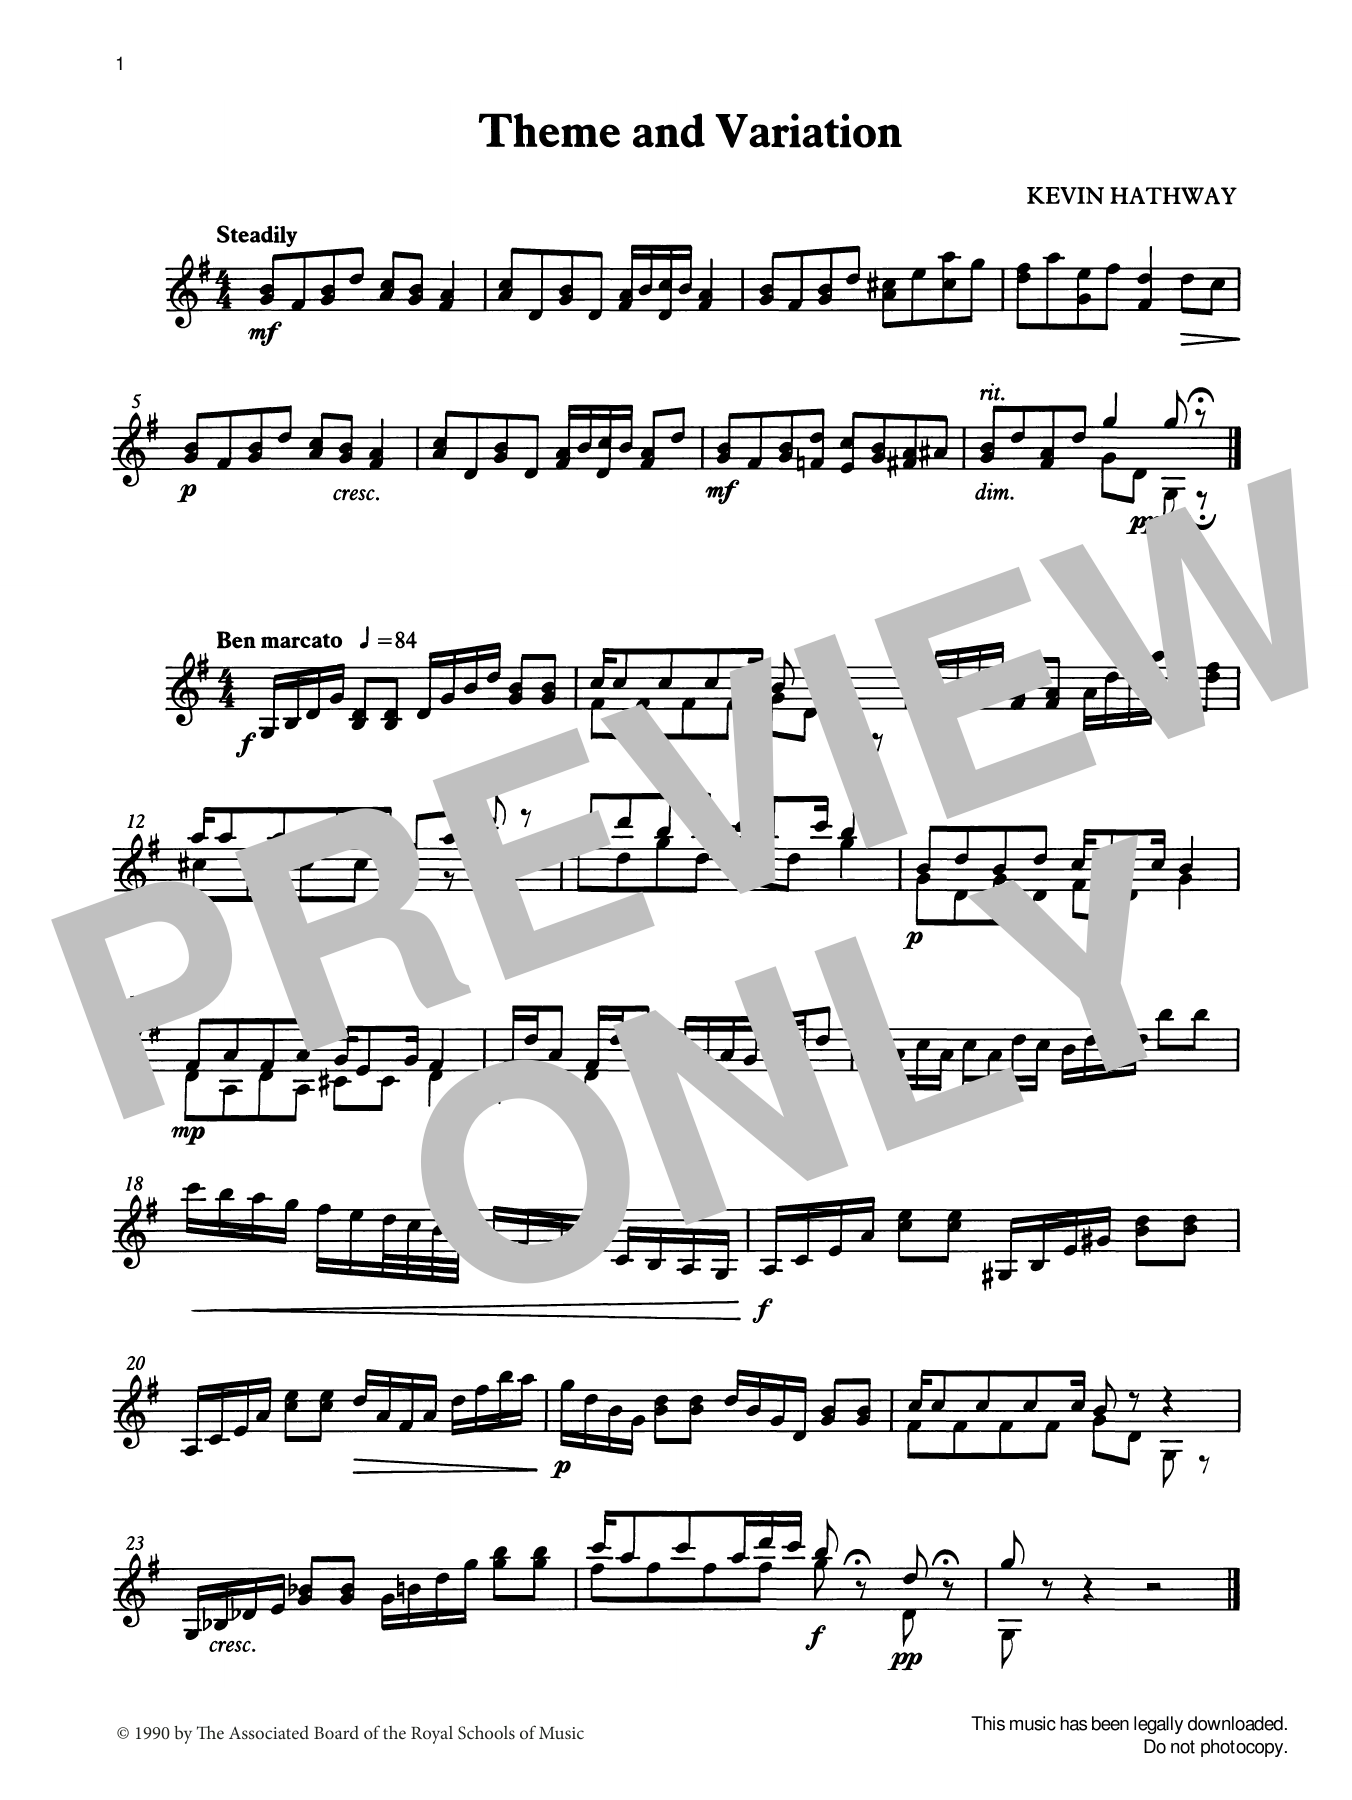 Theme and Variation from Graded Music for Tuned Percussion, Book III (Percussion Solo) von Ian Wright and Kevin Hathaway